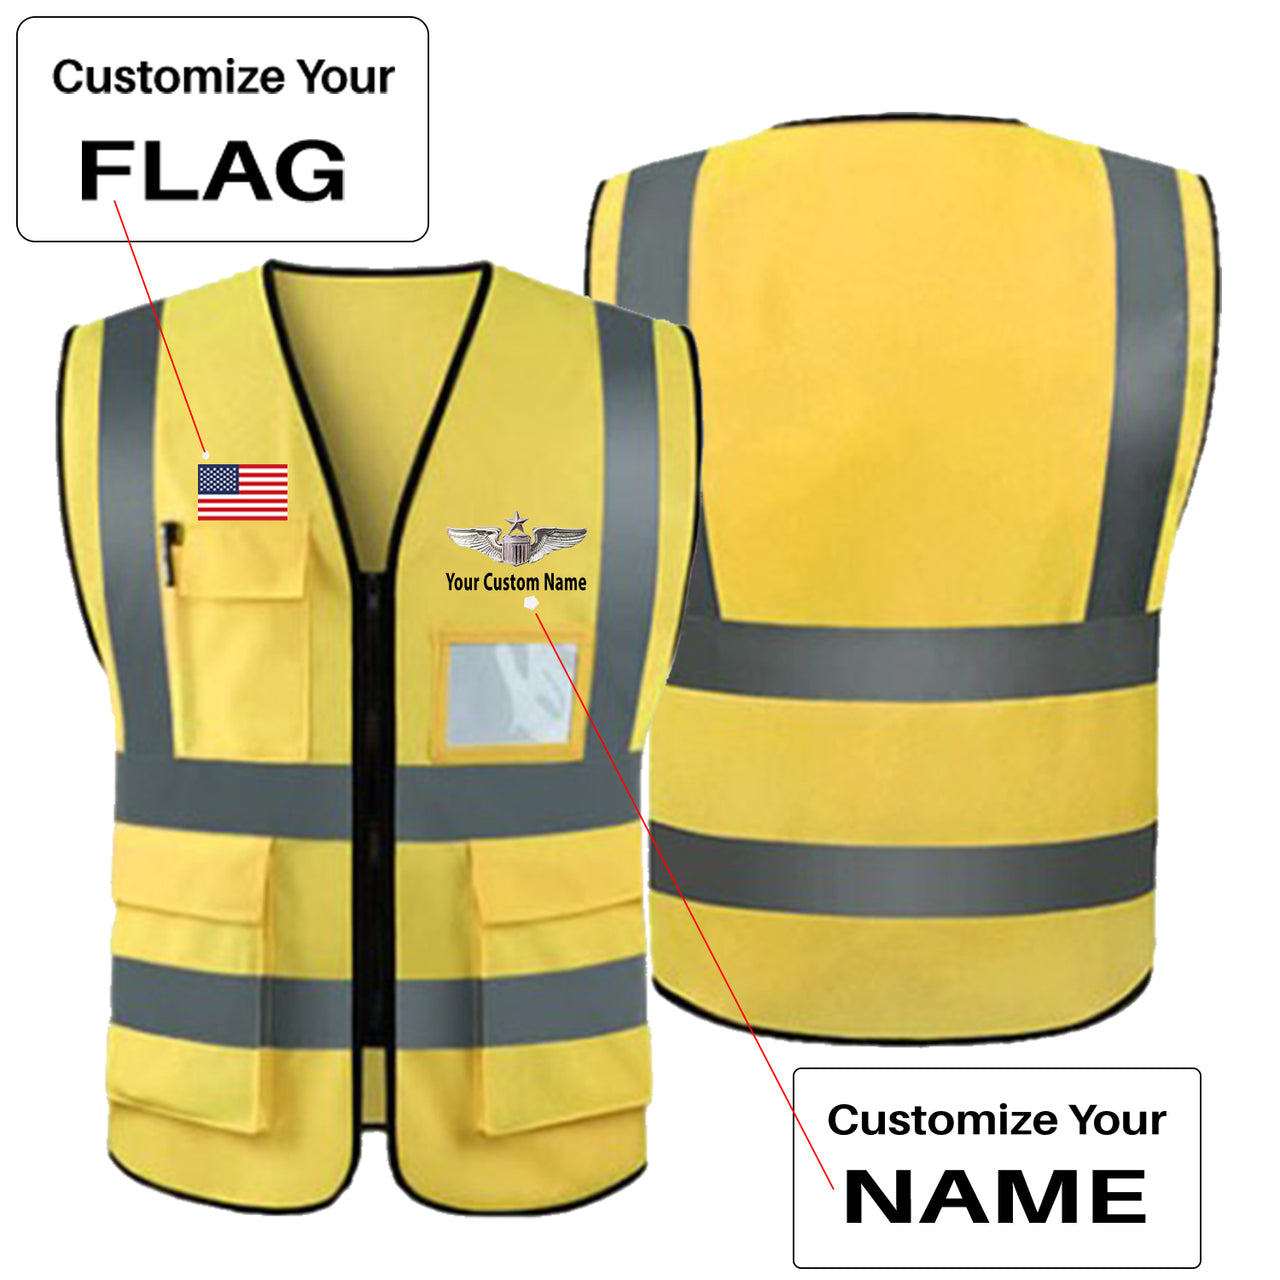 Custom Flag & Name with (US Air Force & Star) Designed Reflective Vests